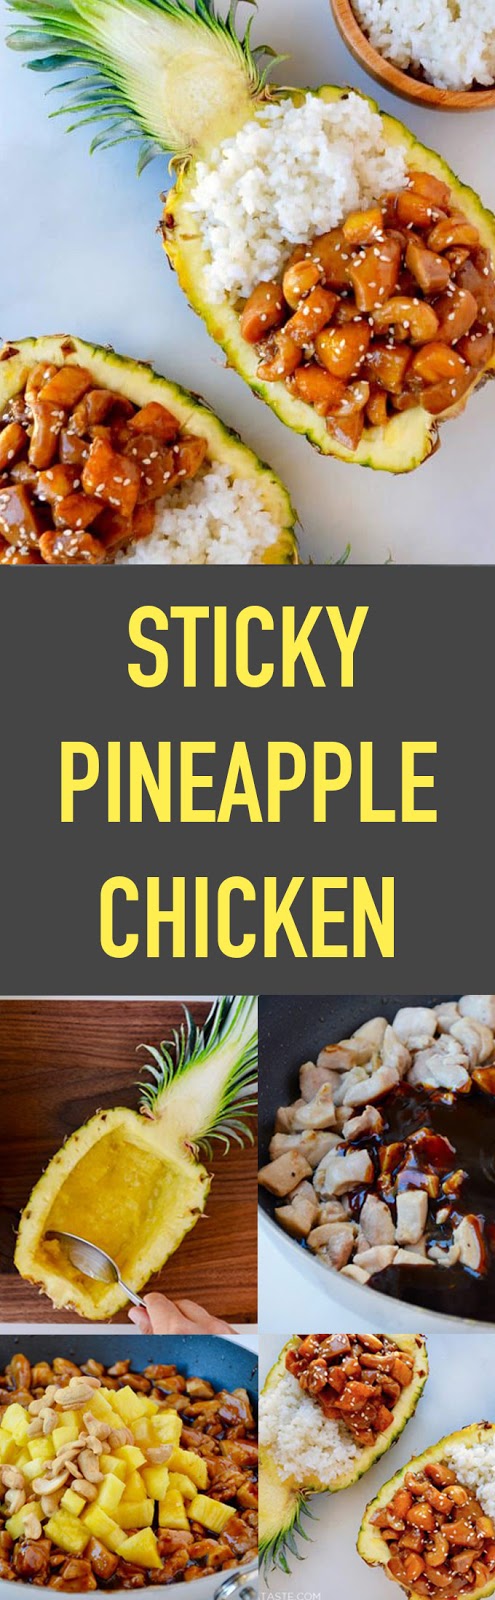 Delicious Sticky Pineapple Chicken